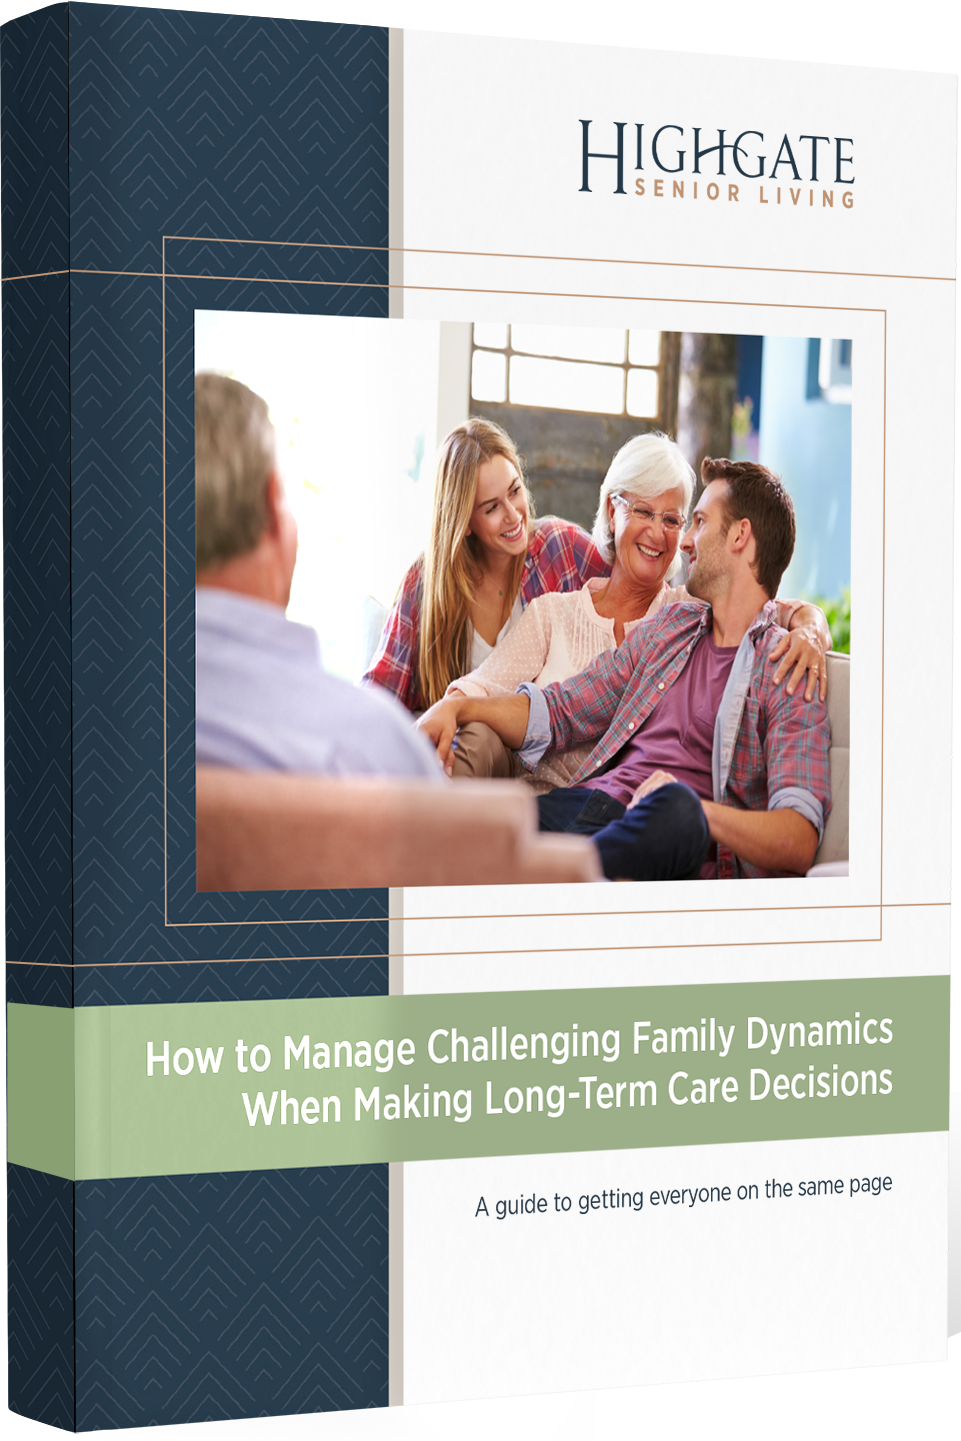 How to Manage Challenging Family Dynamics